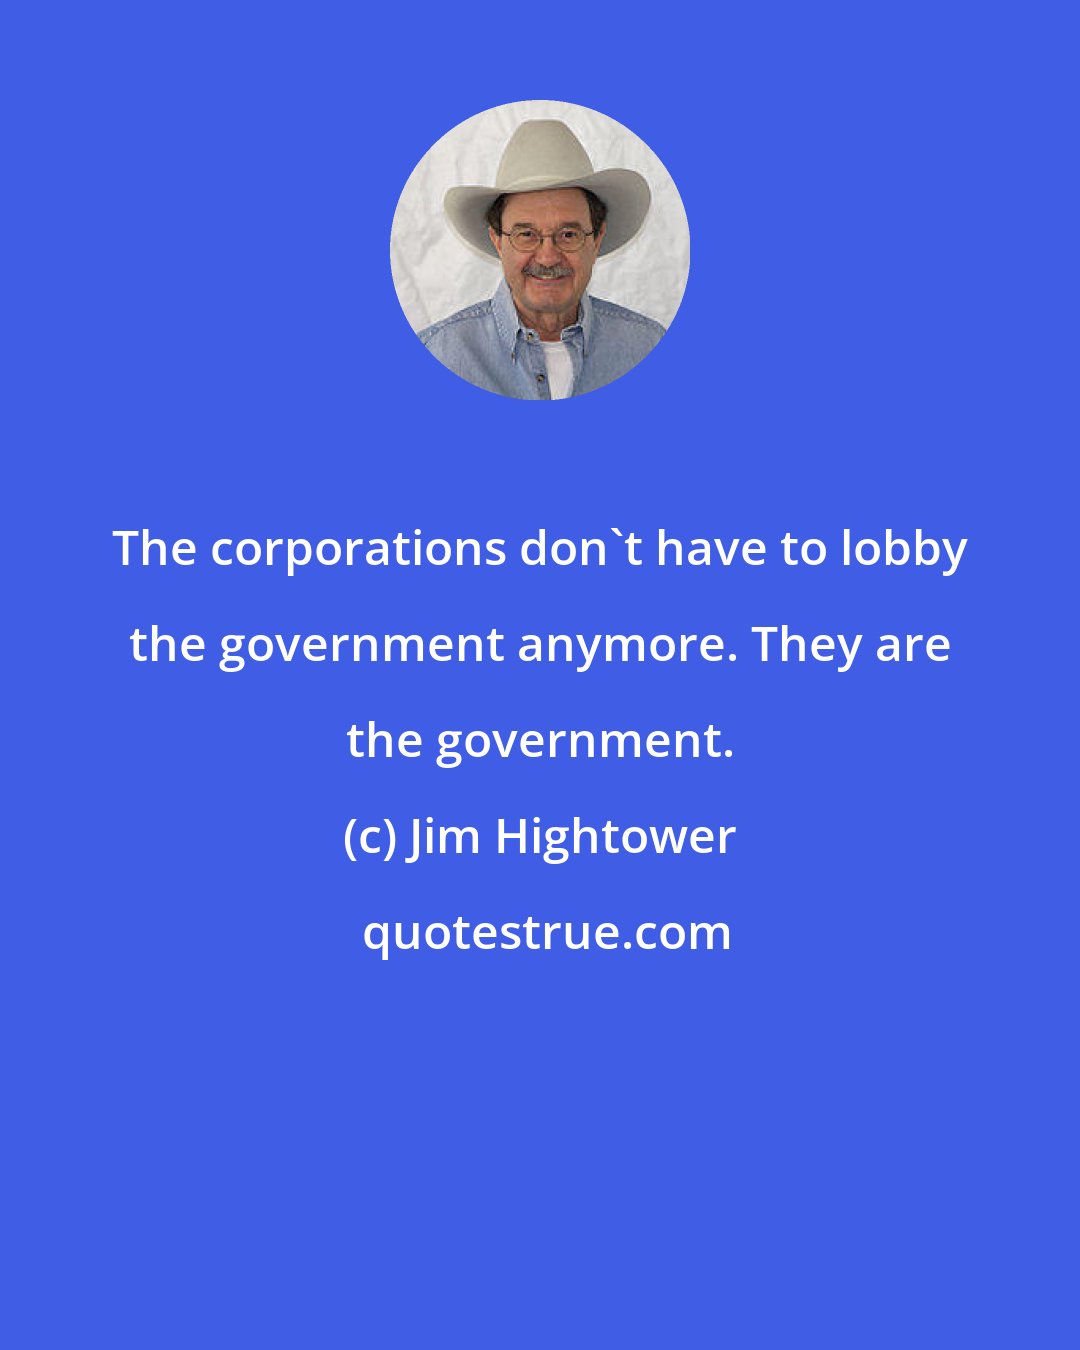 Jim Hightower: The corporations don't have to lobby the government anymore. They are the government.